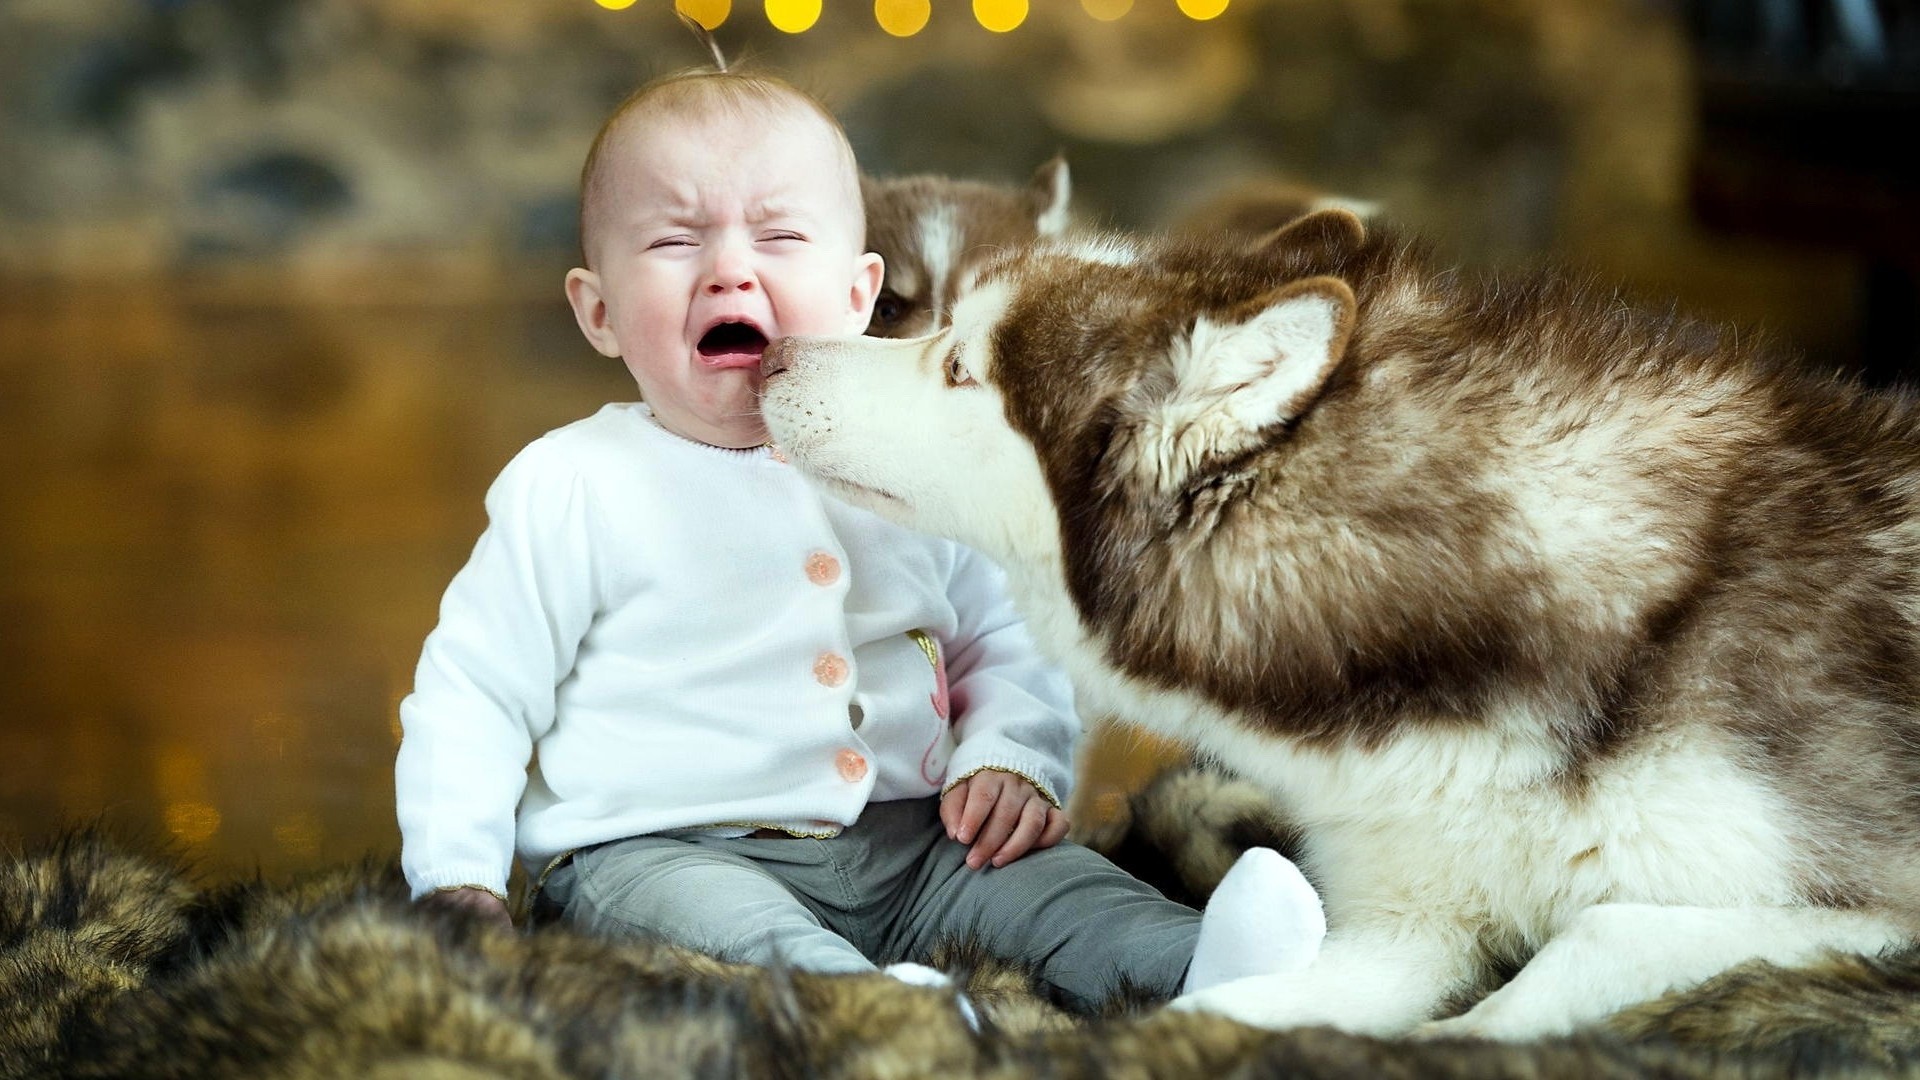 Cute Crying Baby With Dog Wallpapers HD Wallpapers